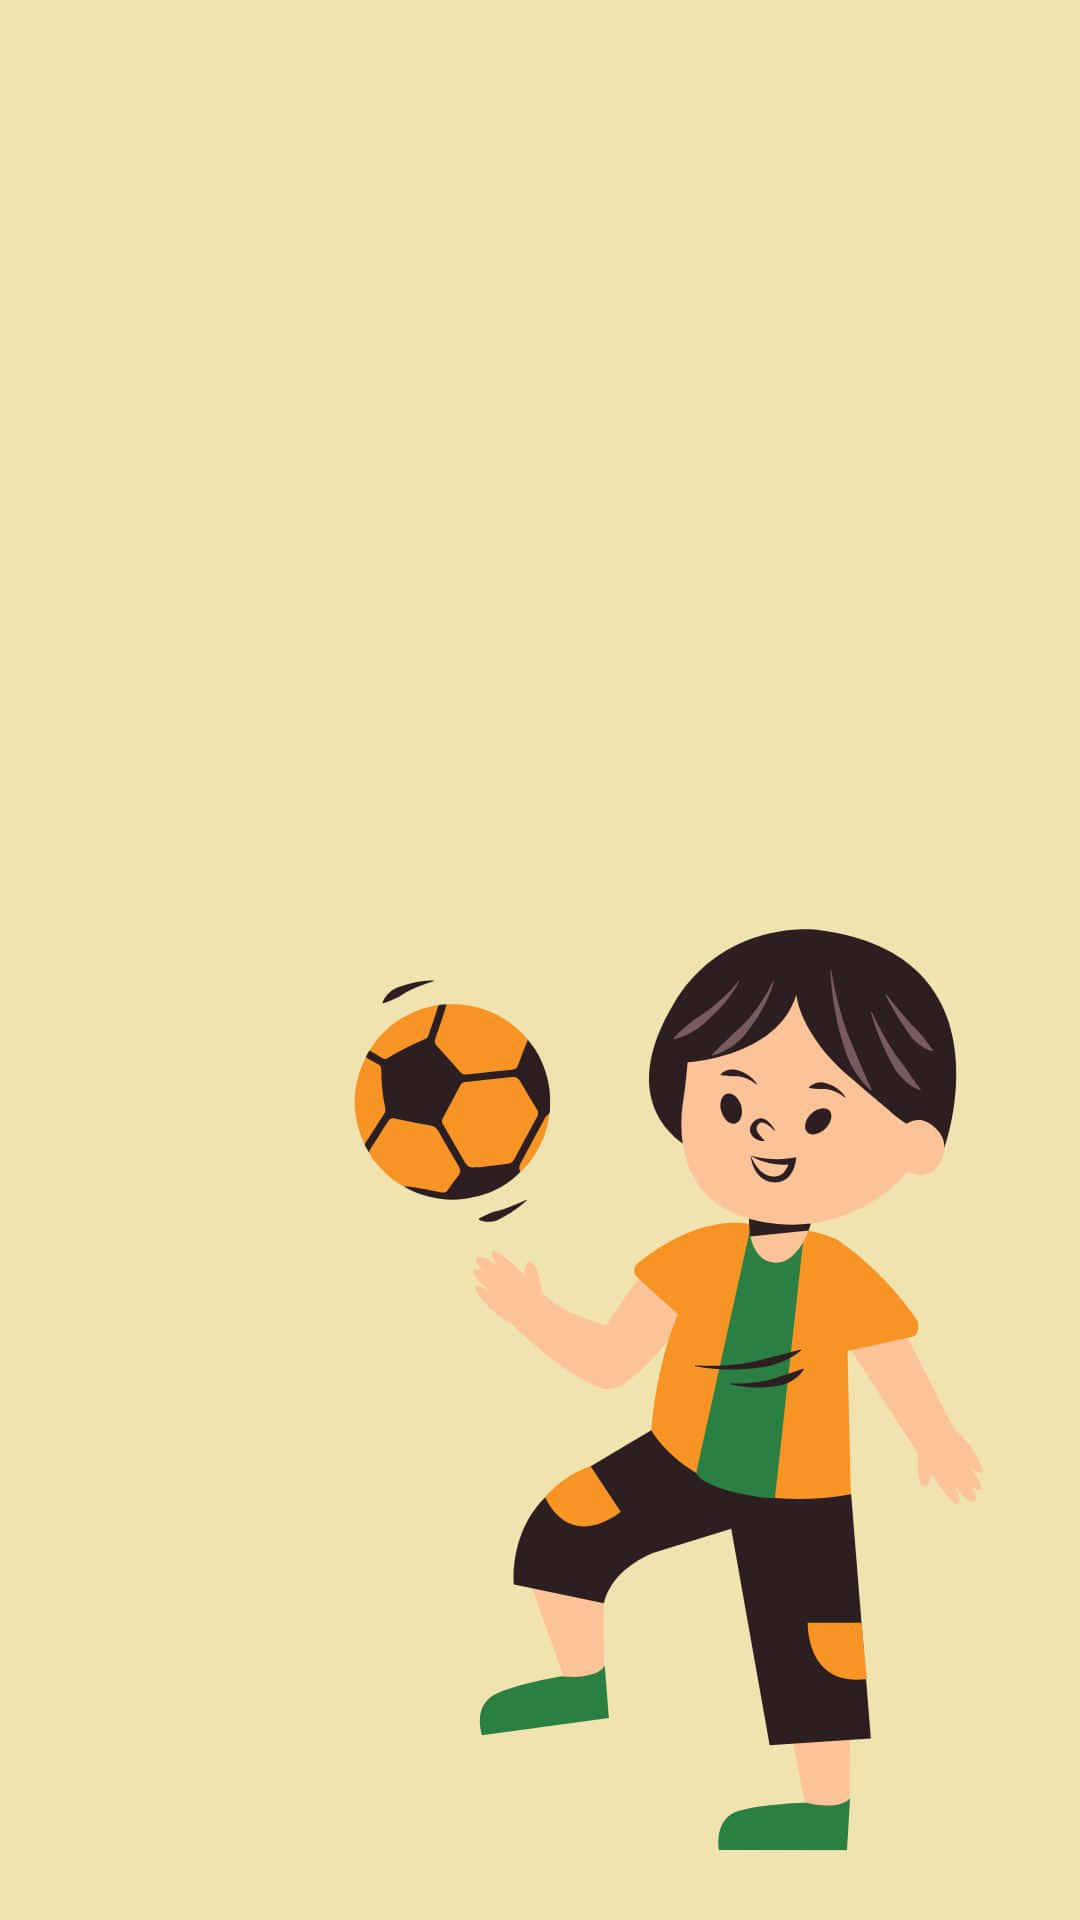 Handsome Boy Cartoon Playing Soccer Ball Background